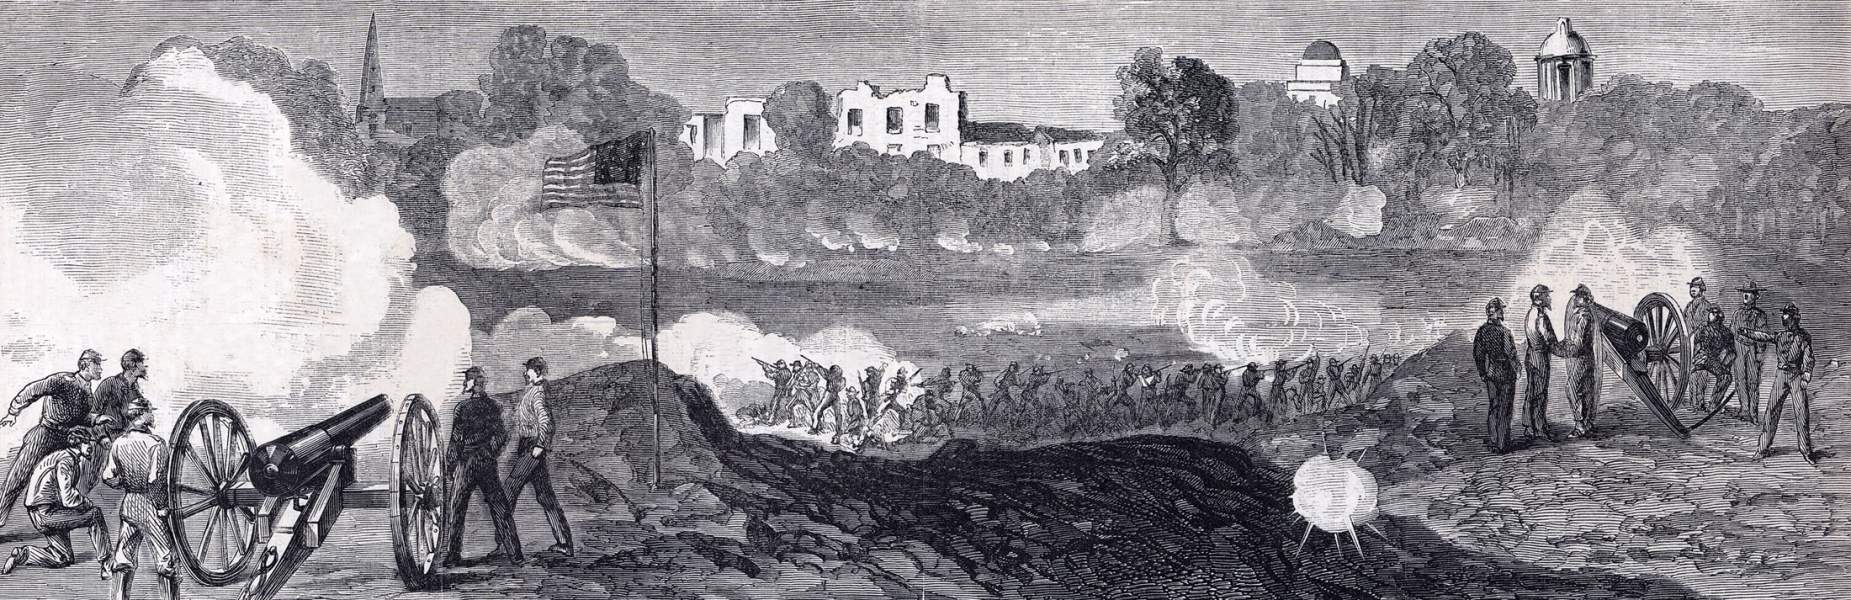 Union forces moving on Jackson, Mississippi, July 1863, artist's impression, zoomable image